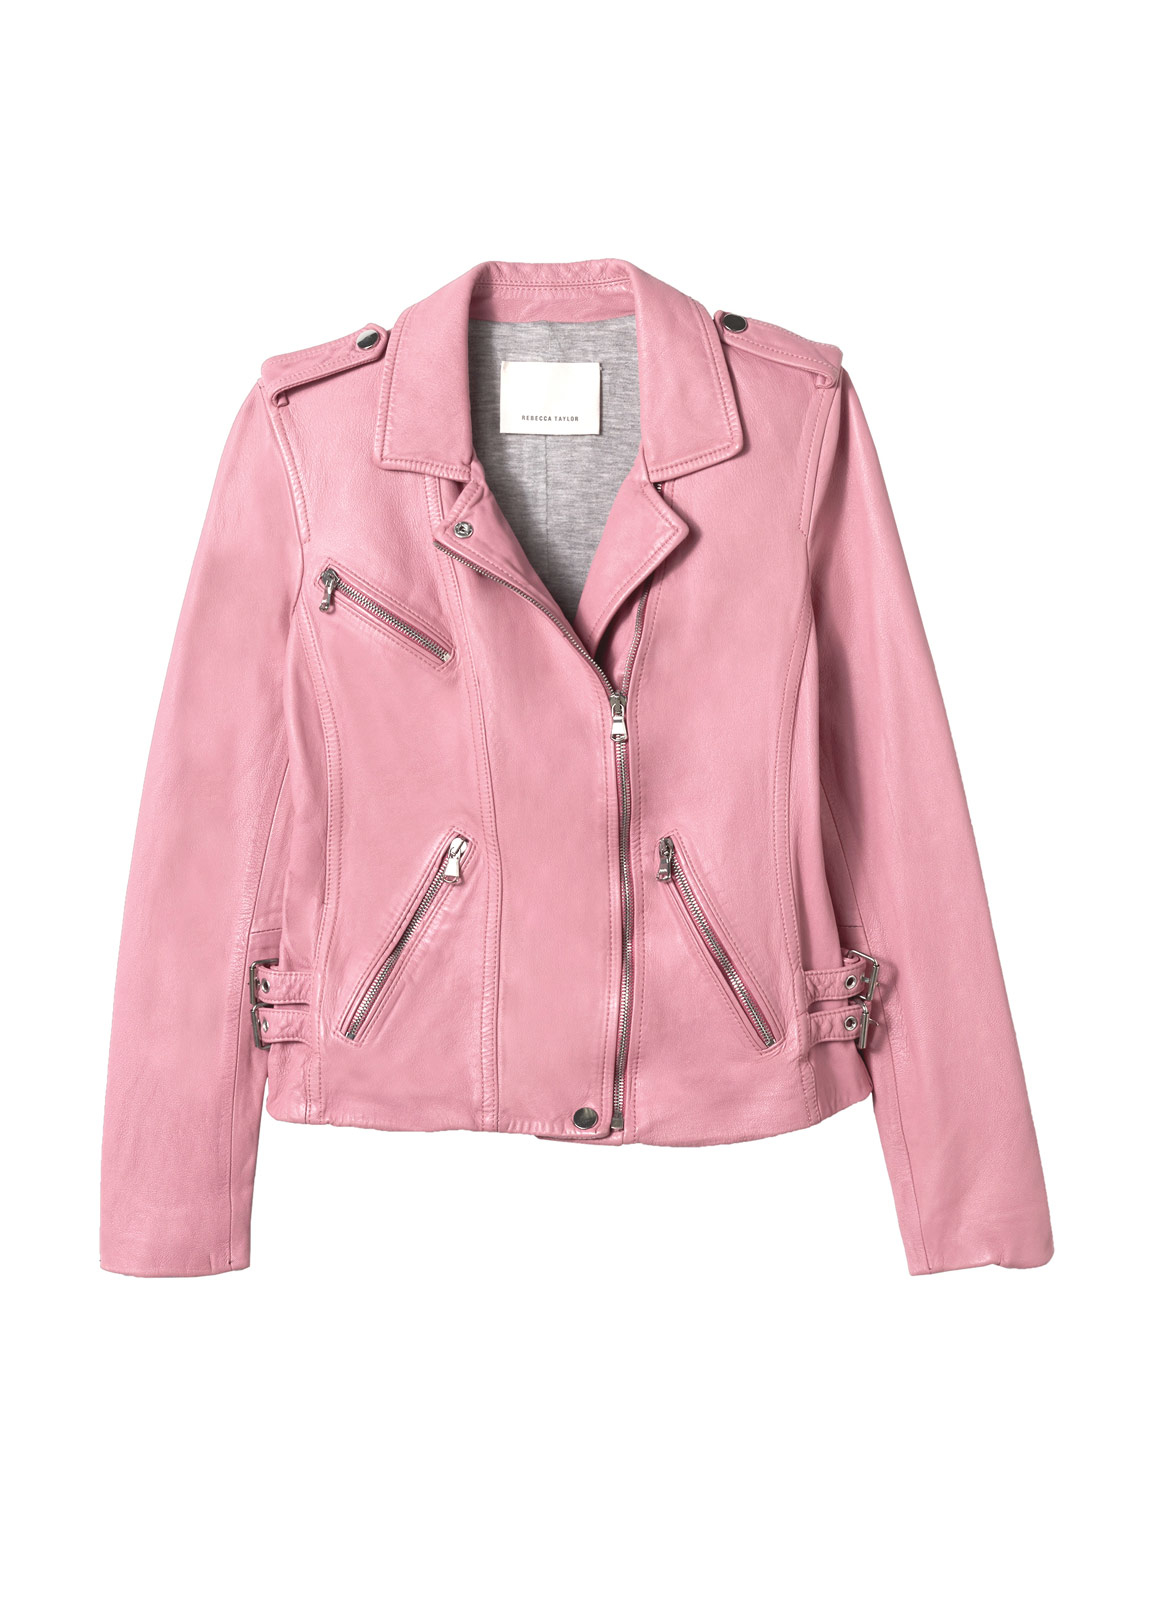 Lyst - Rebecca Taylor Washed Leather Jacket in Pink